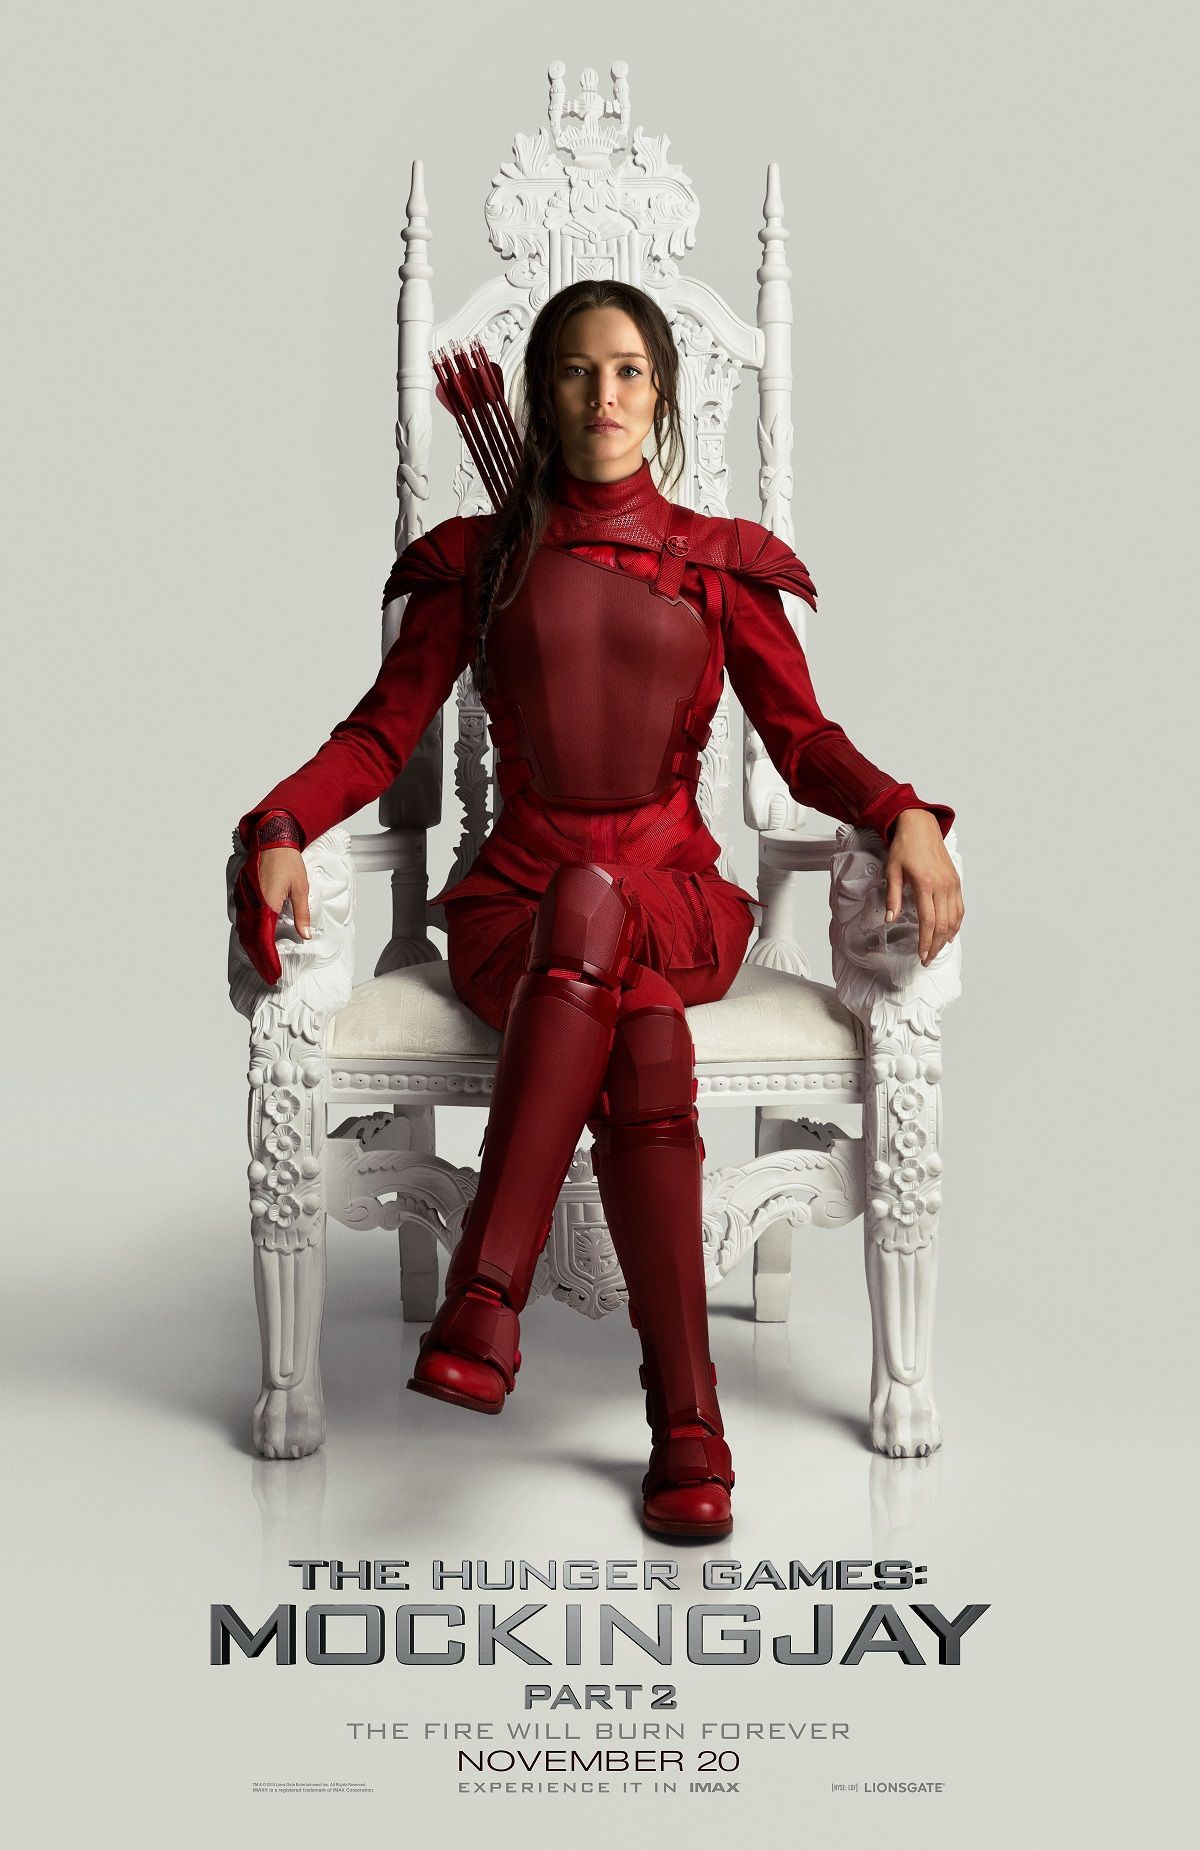 Katniss in Red The Hunger Games Mockingjay Part 2 Poster